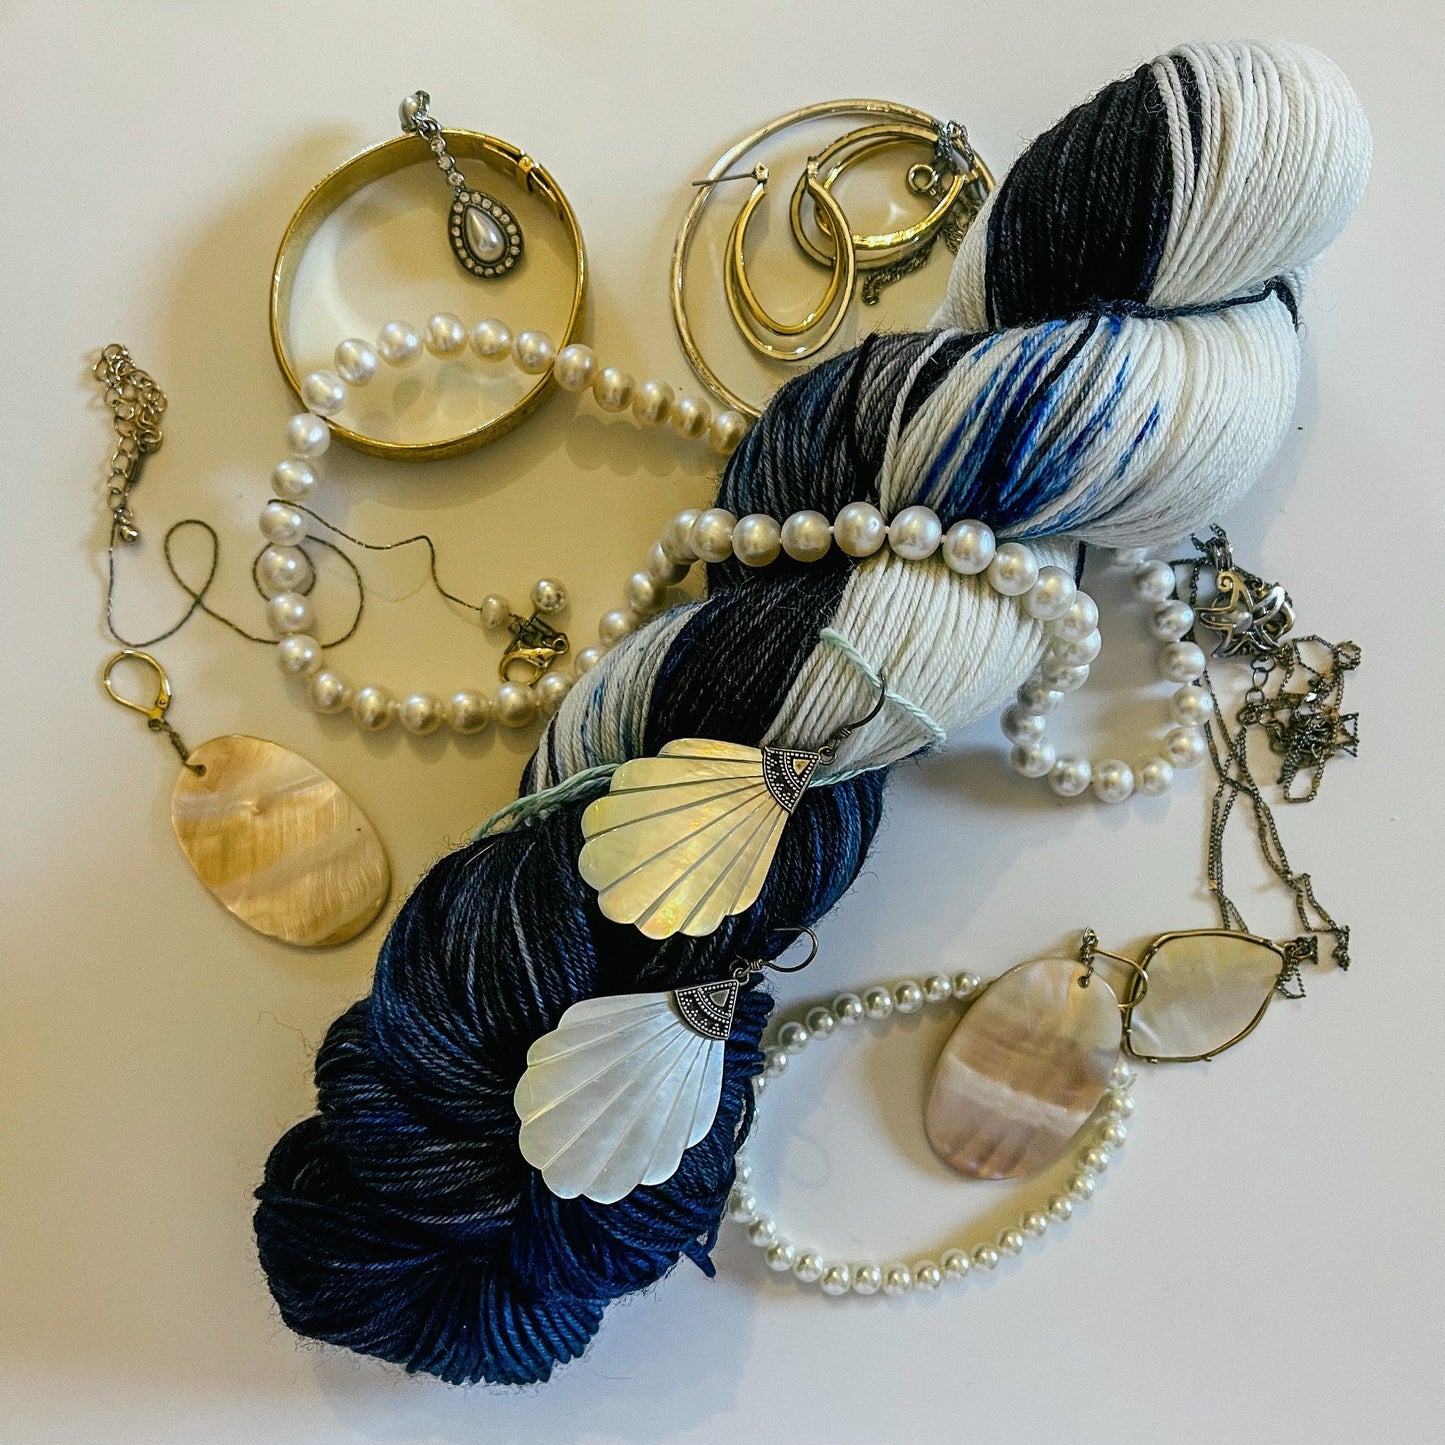 A skein of black, blue, and white variegated hand-dyed yarn surrounded by silver and pearl jewelry.